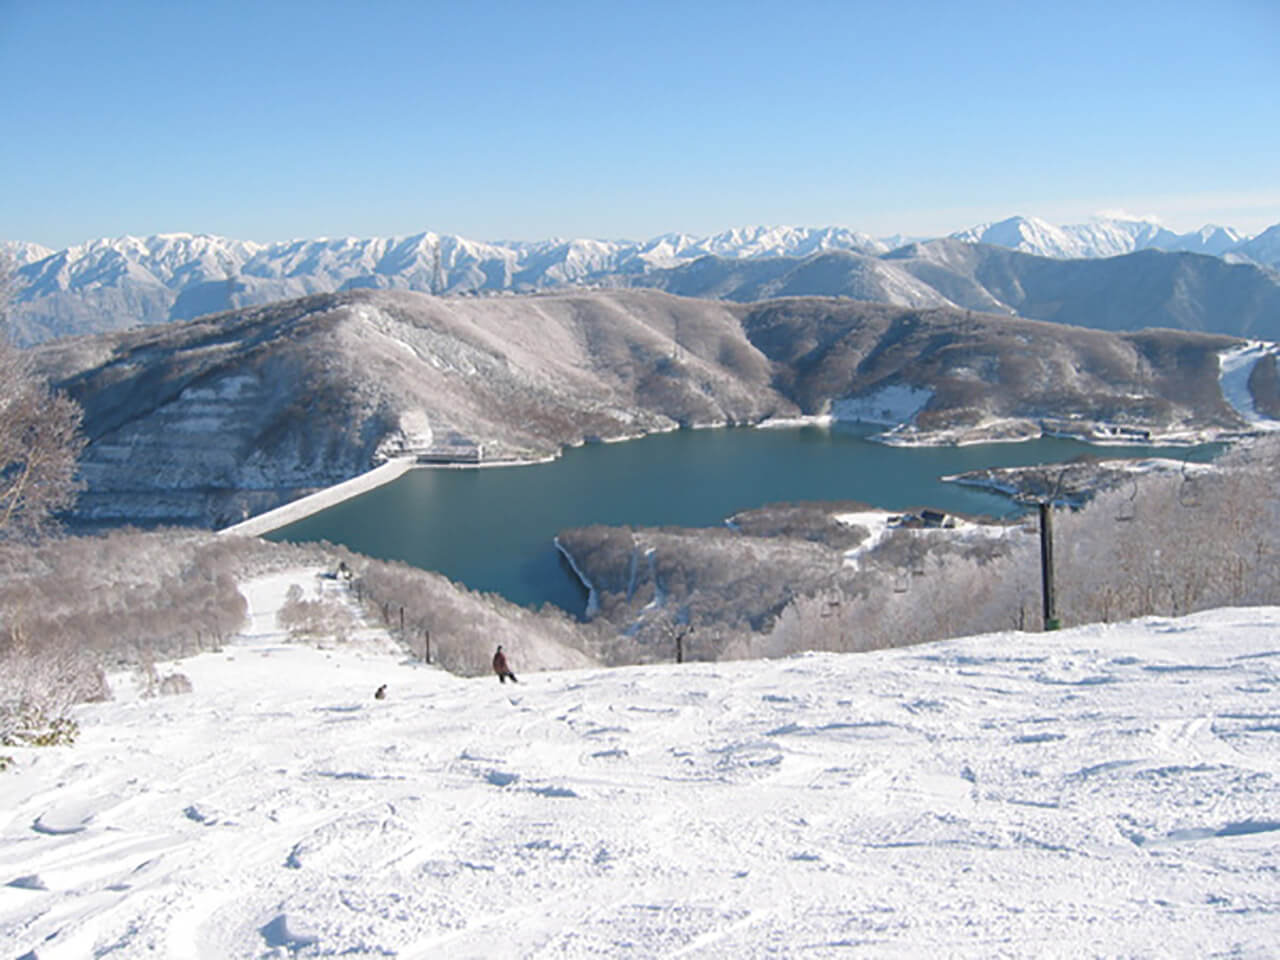 One of Japan's leading snow resorts